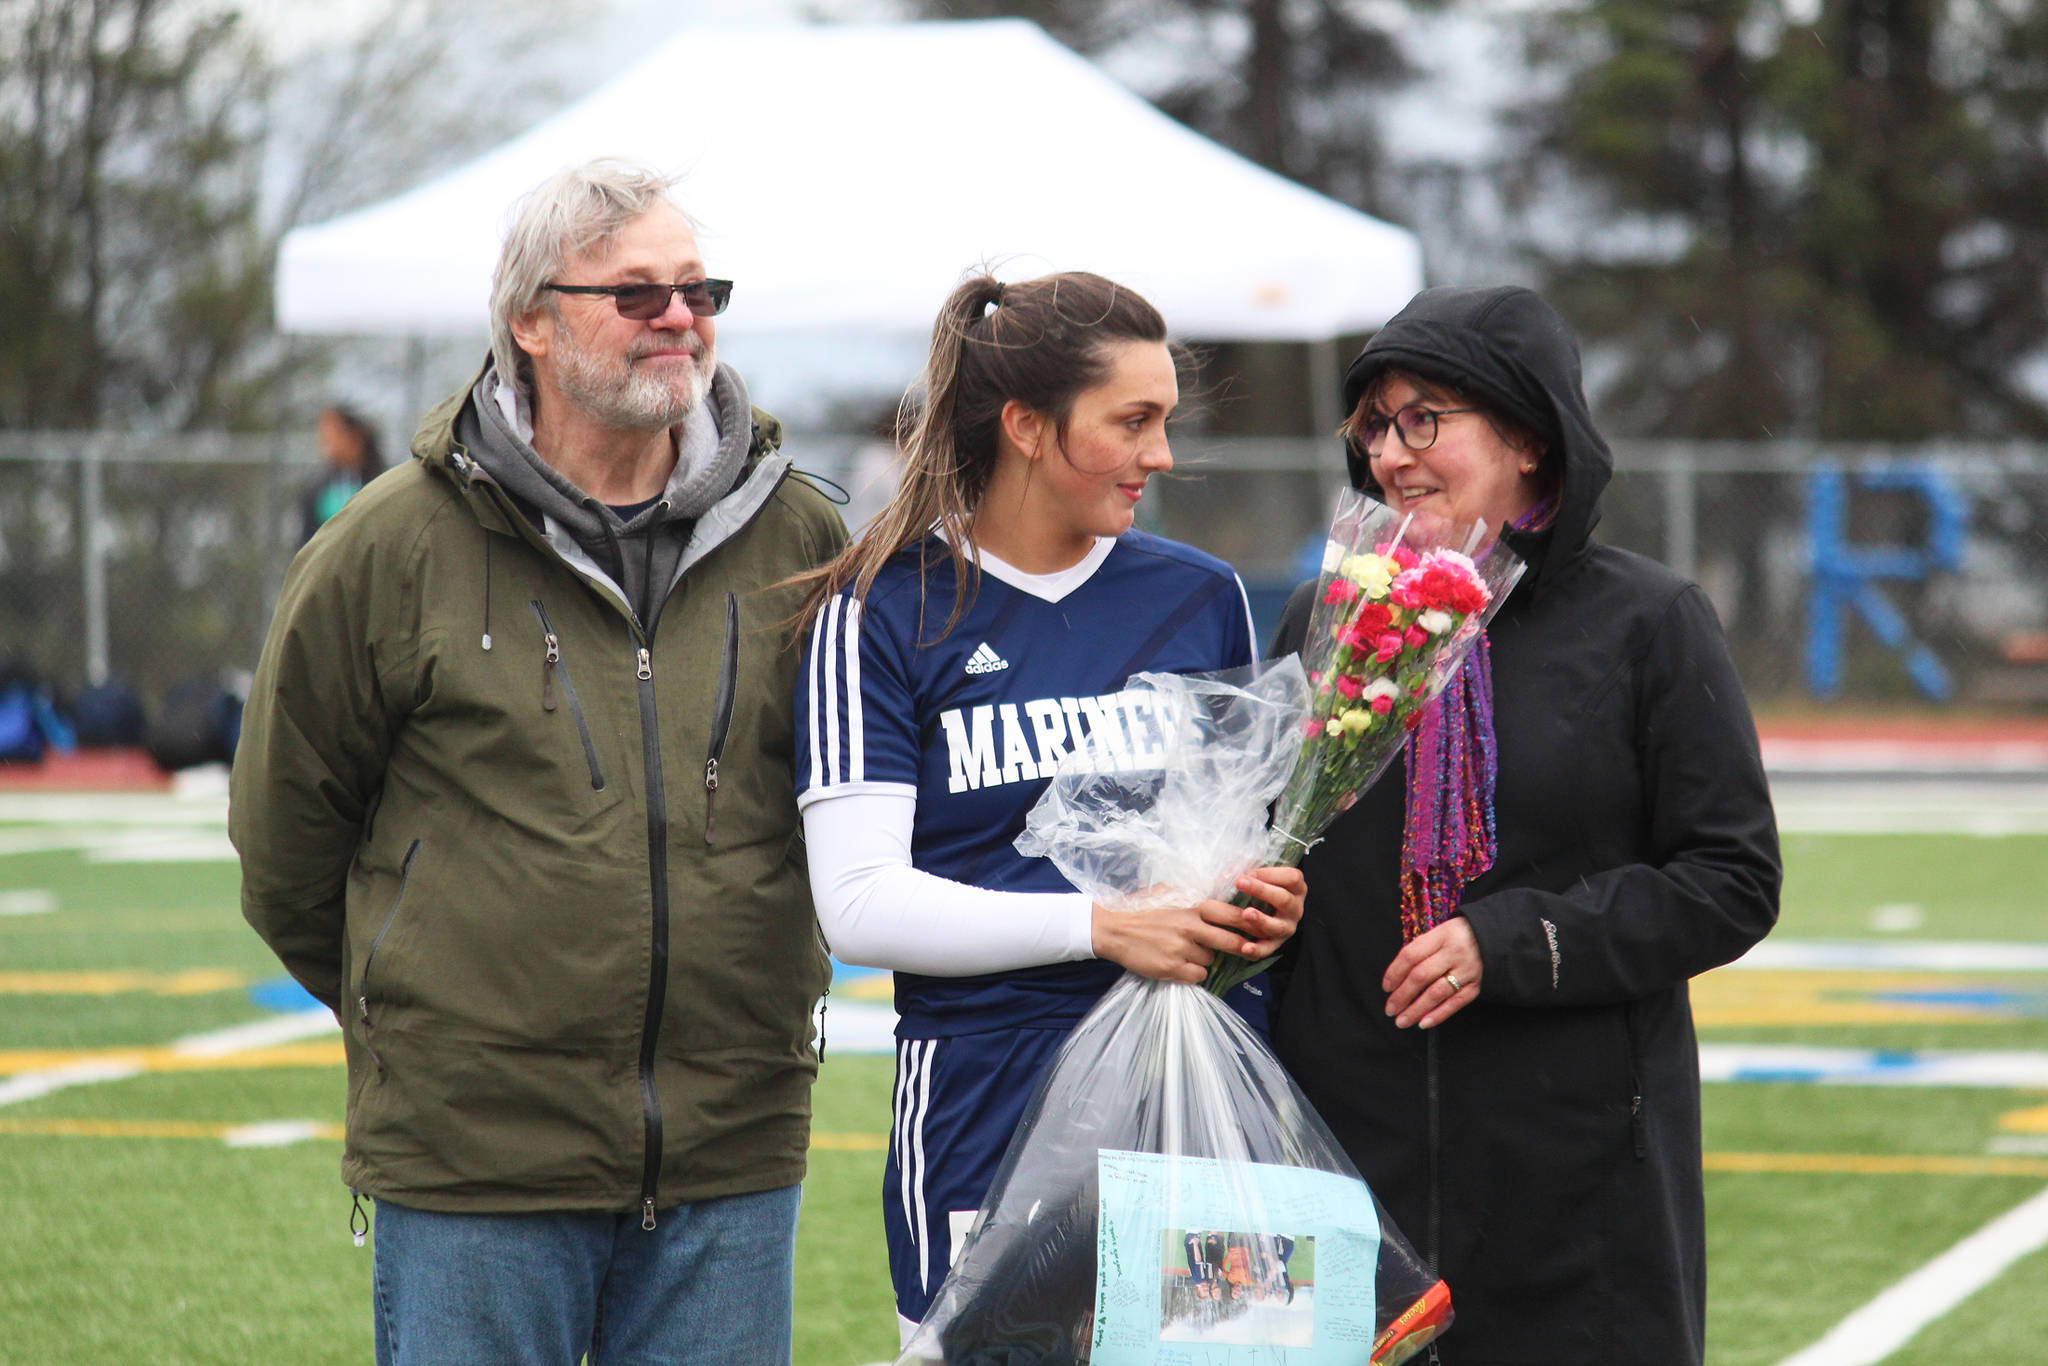 Defender and midfielder Kimberly Lynn celebrates with her parents while being recognized on Senior Night between games against Thunder Mountain on Friday, May 10, 2019 at Homer High School in Homer, Alaska. (Photo by Megan Pacer/Homer News)